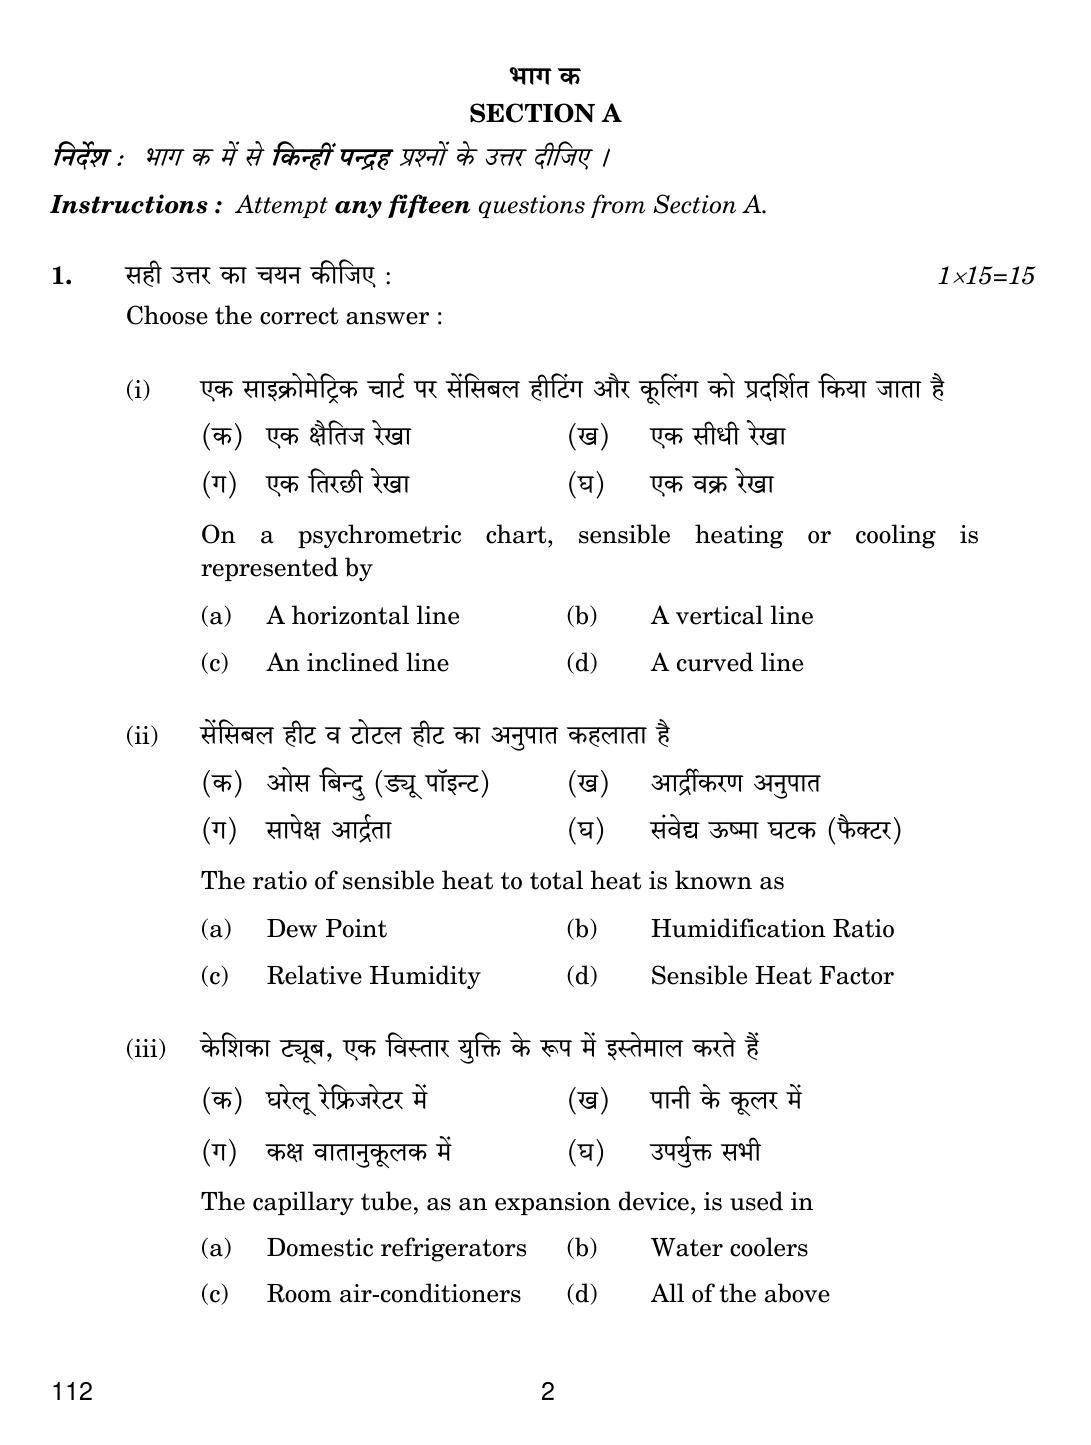 CBSE Class 12 112 Air-Conditioning And Refrigeration-III 2019 Question Paper - Page 2